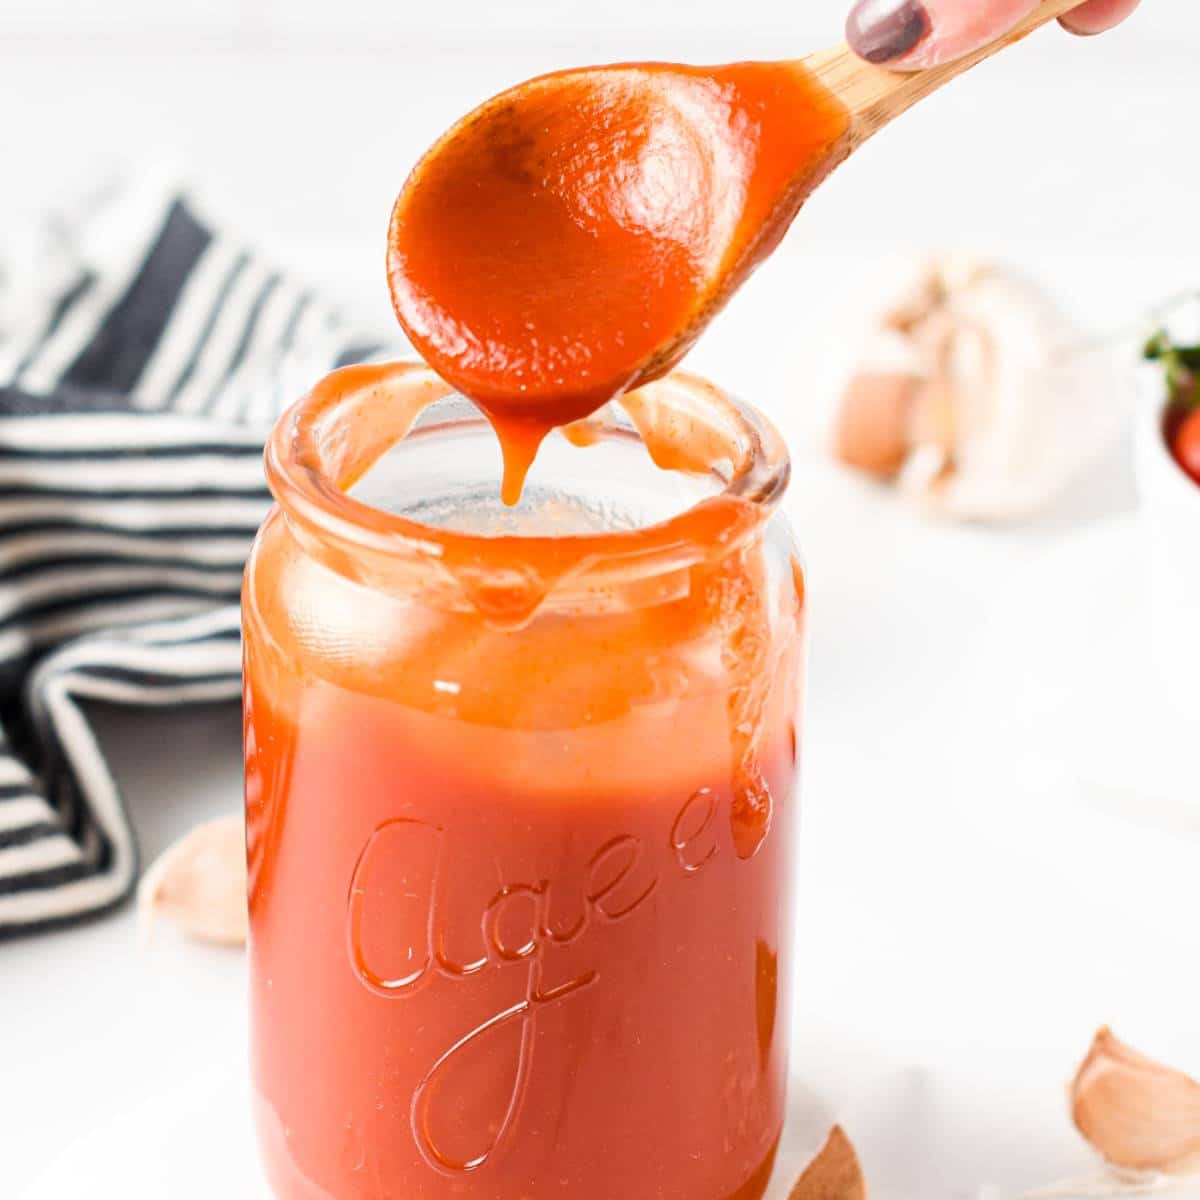 Glass jar with Homemade BBQ Sauce with 3 ingredients and a wooden spoon dripping sauce above it.